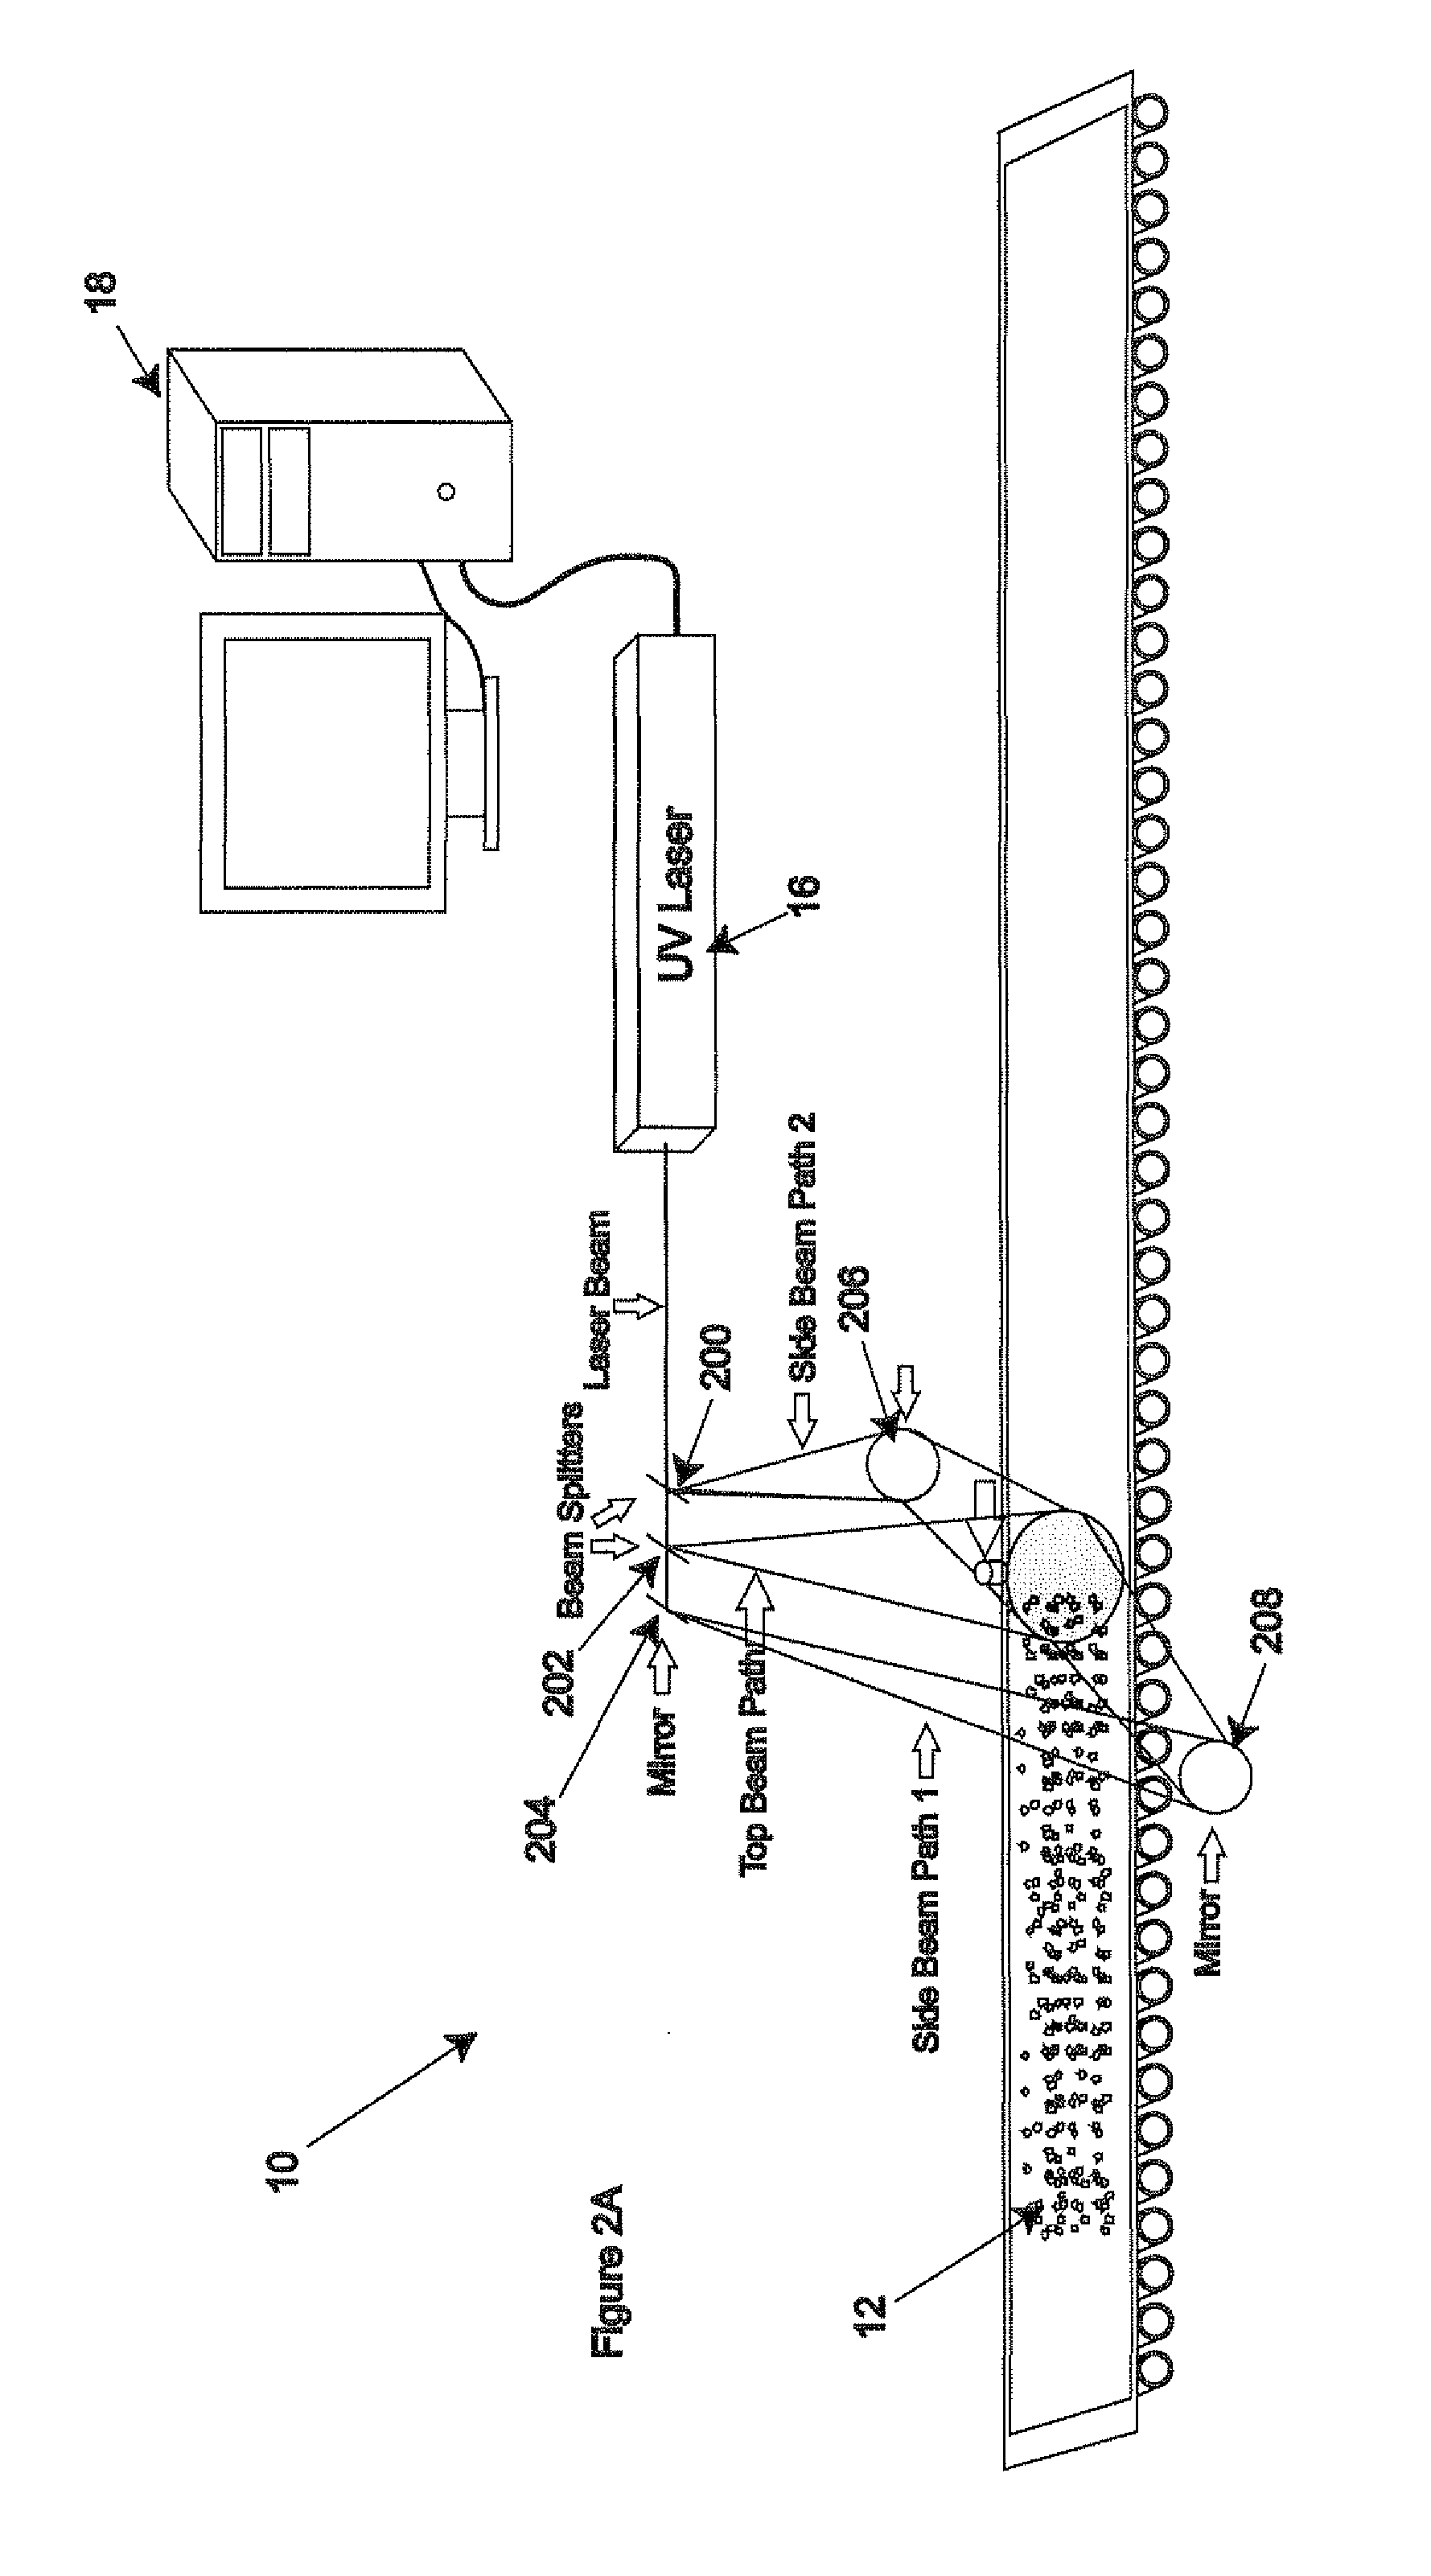 Method and apparatus for sanitizing consumable products using ultraviolet light